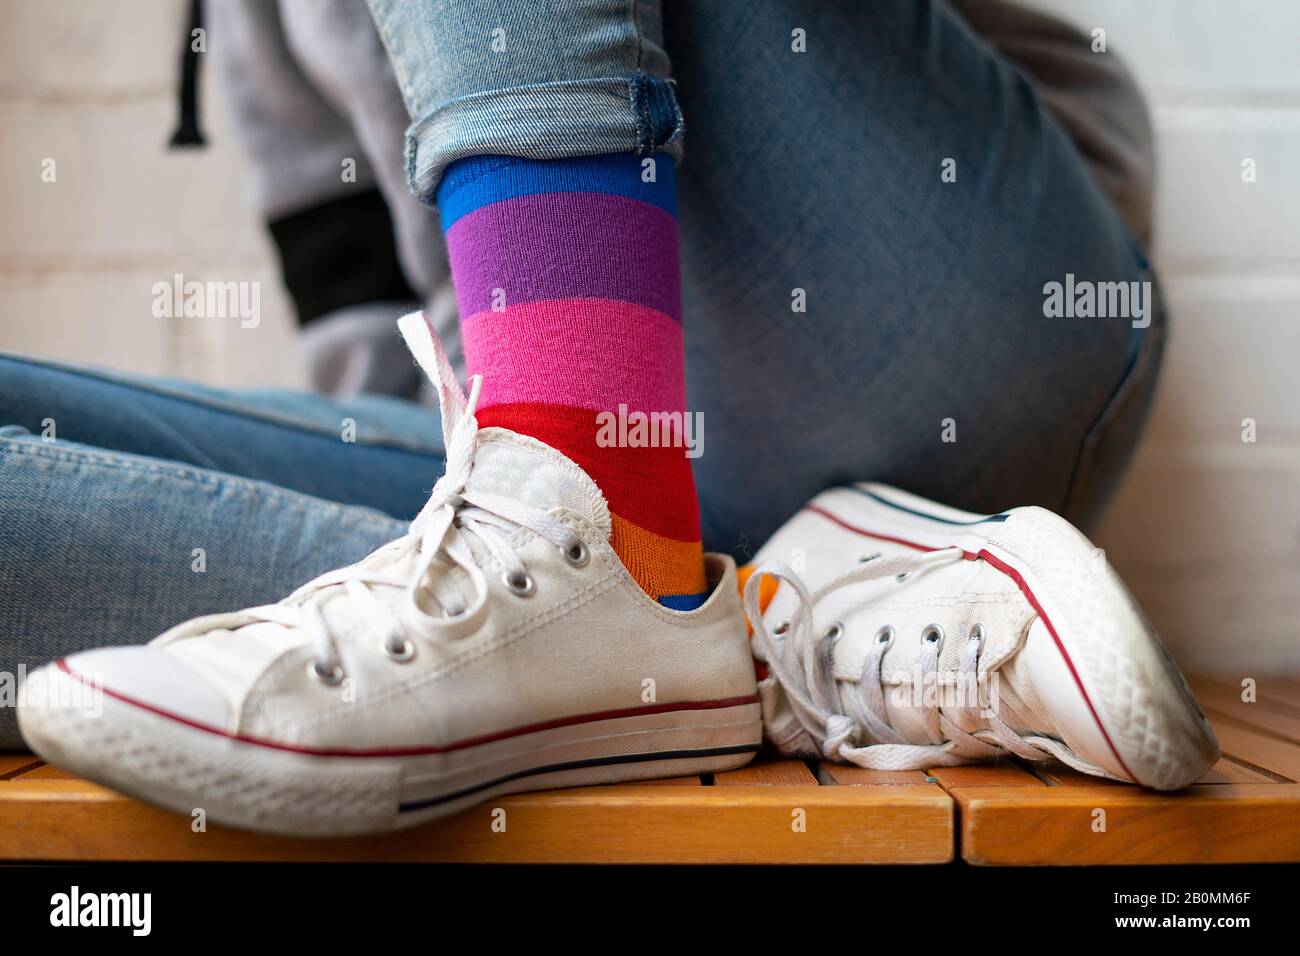 Pride Socks High Resolution Stock Photography and Images - Alamy